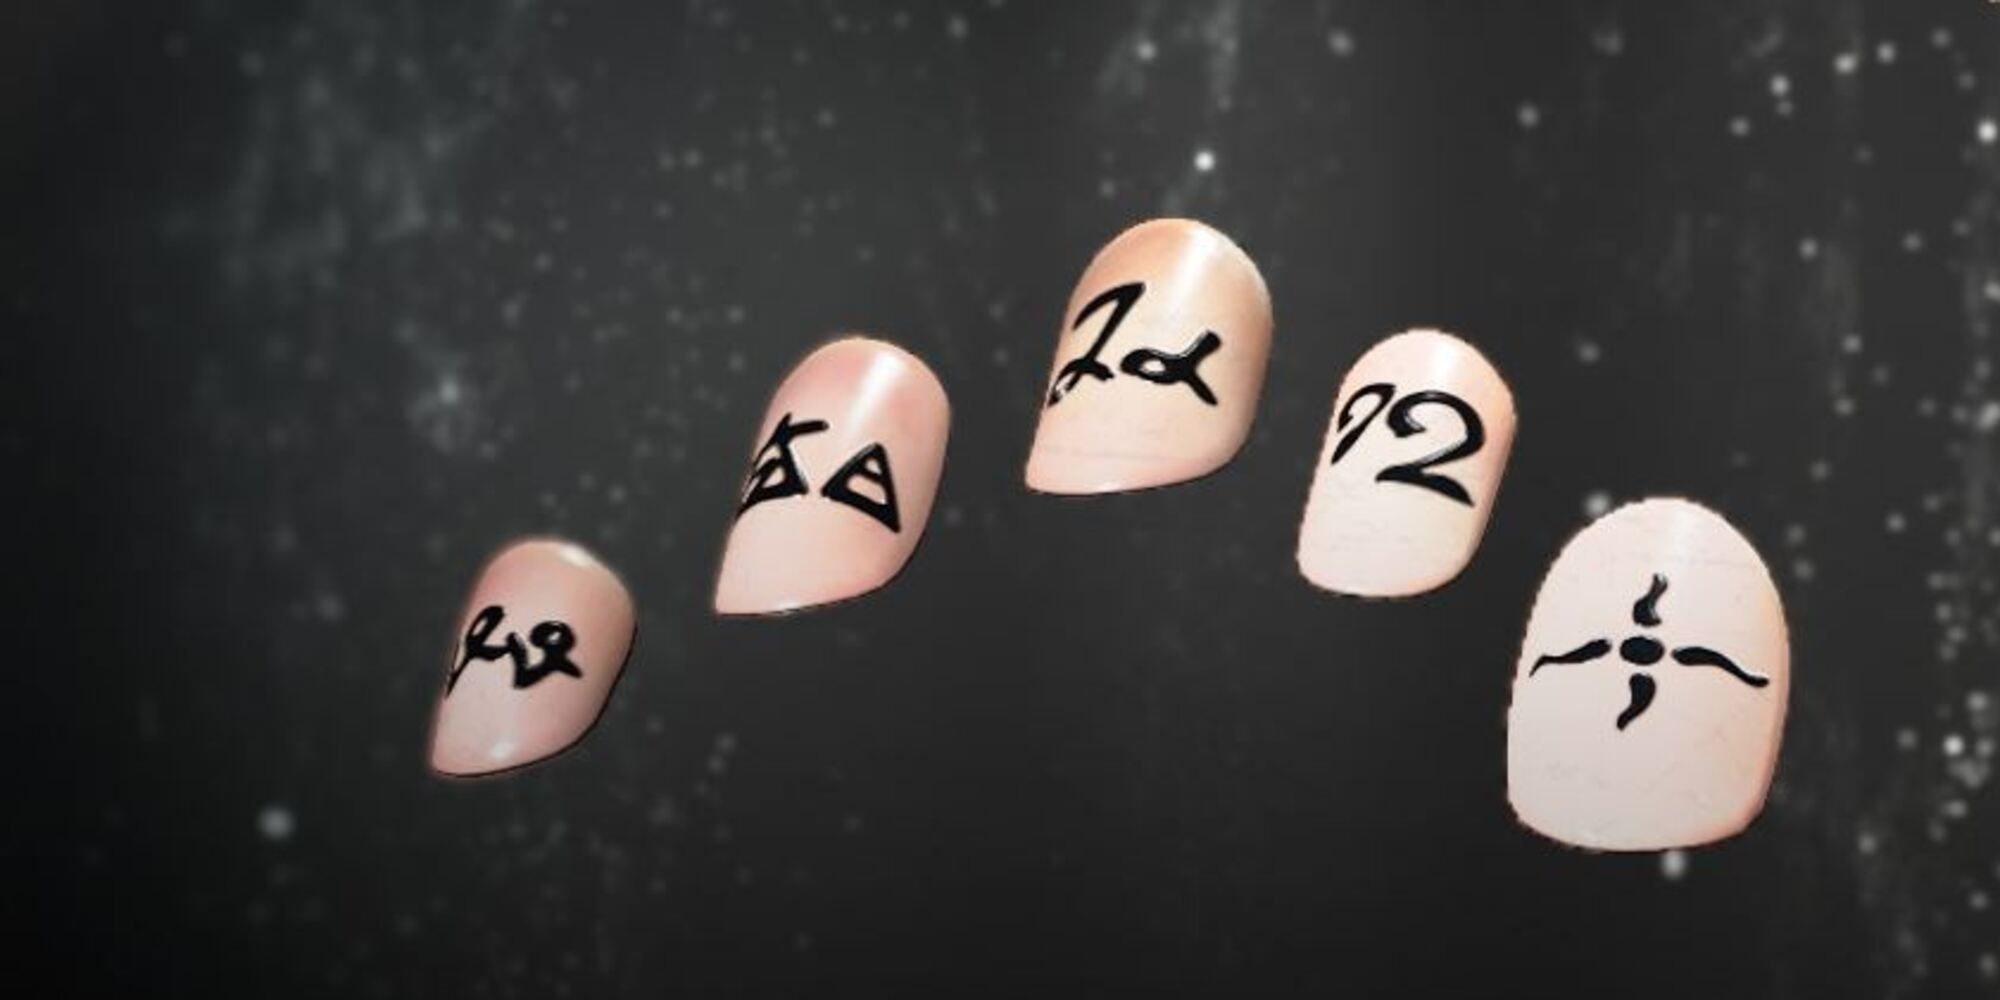 Image of a nail set, light peach with writing in another language layered on top as a nail design.